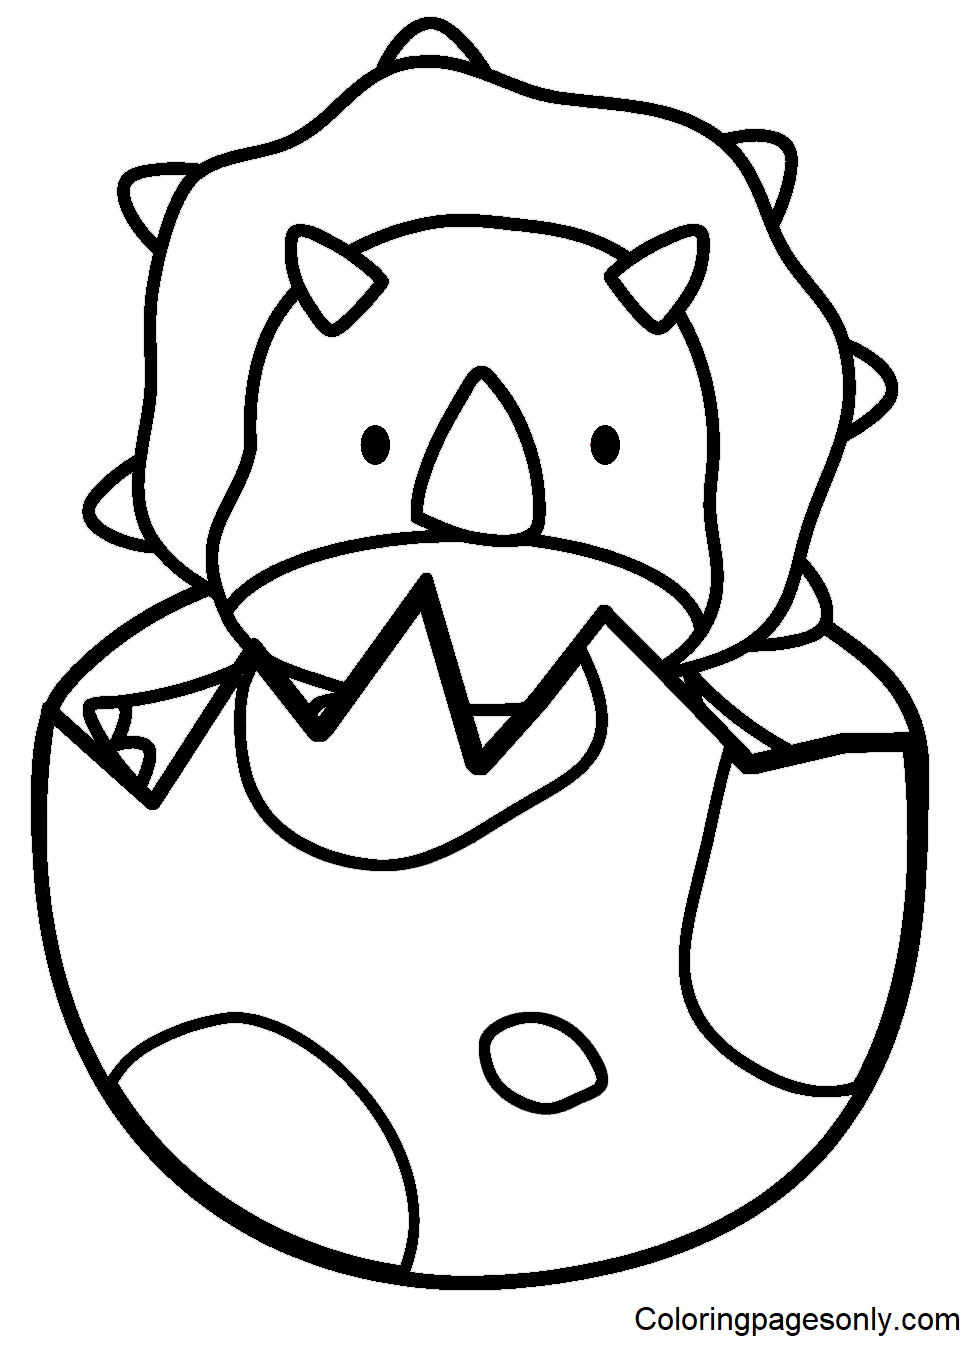 Cute Triceratops in Egg Coloring Page